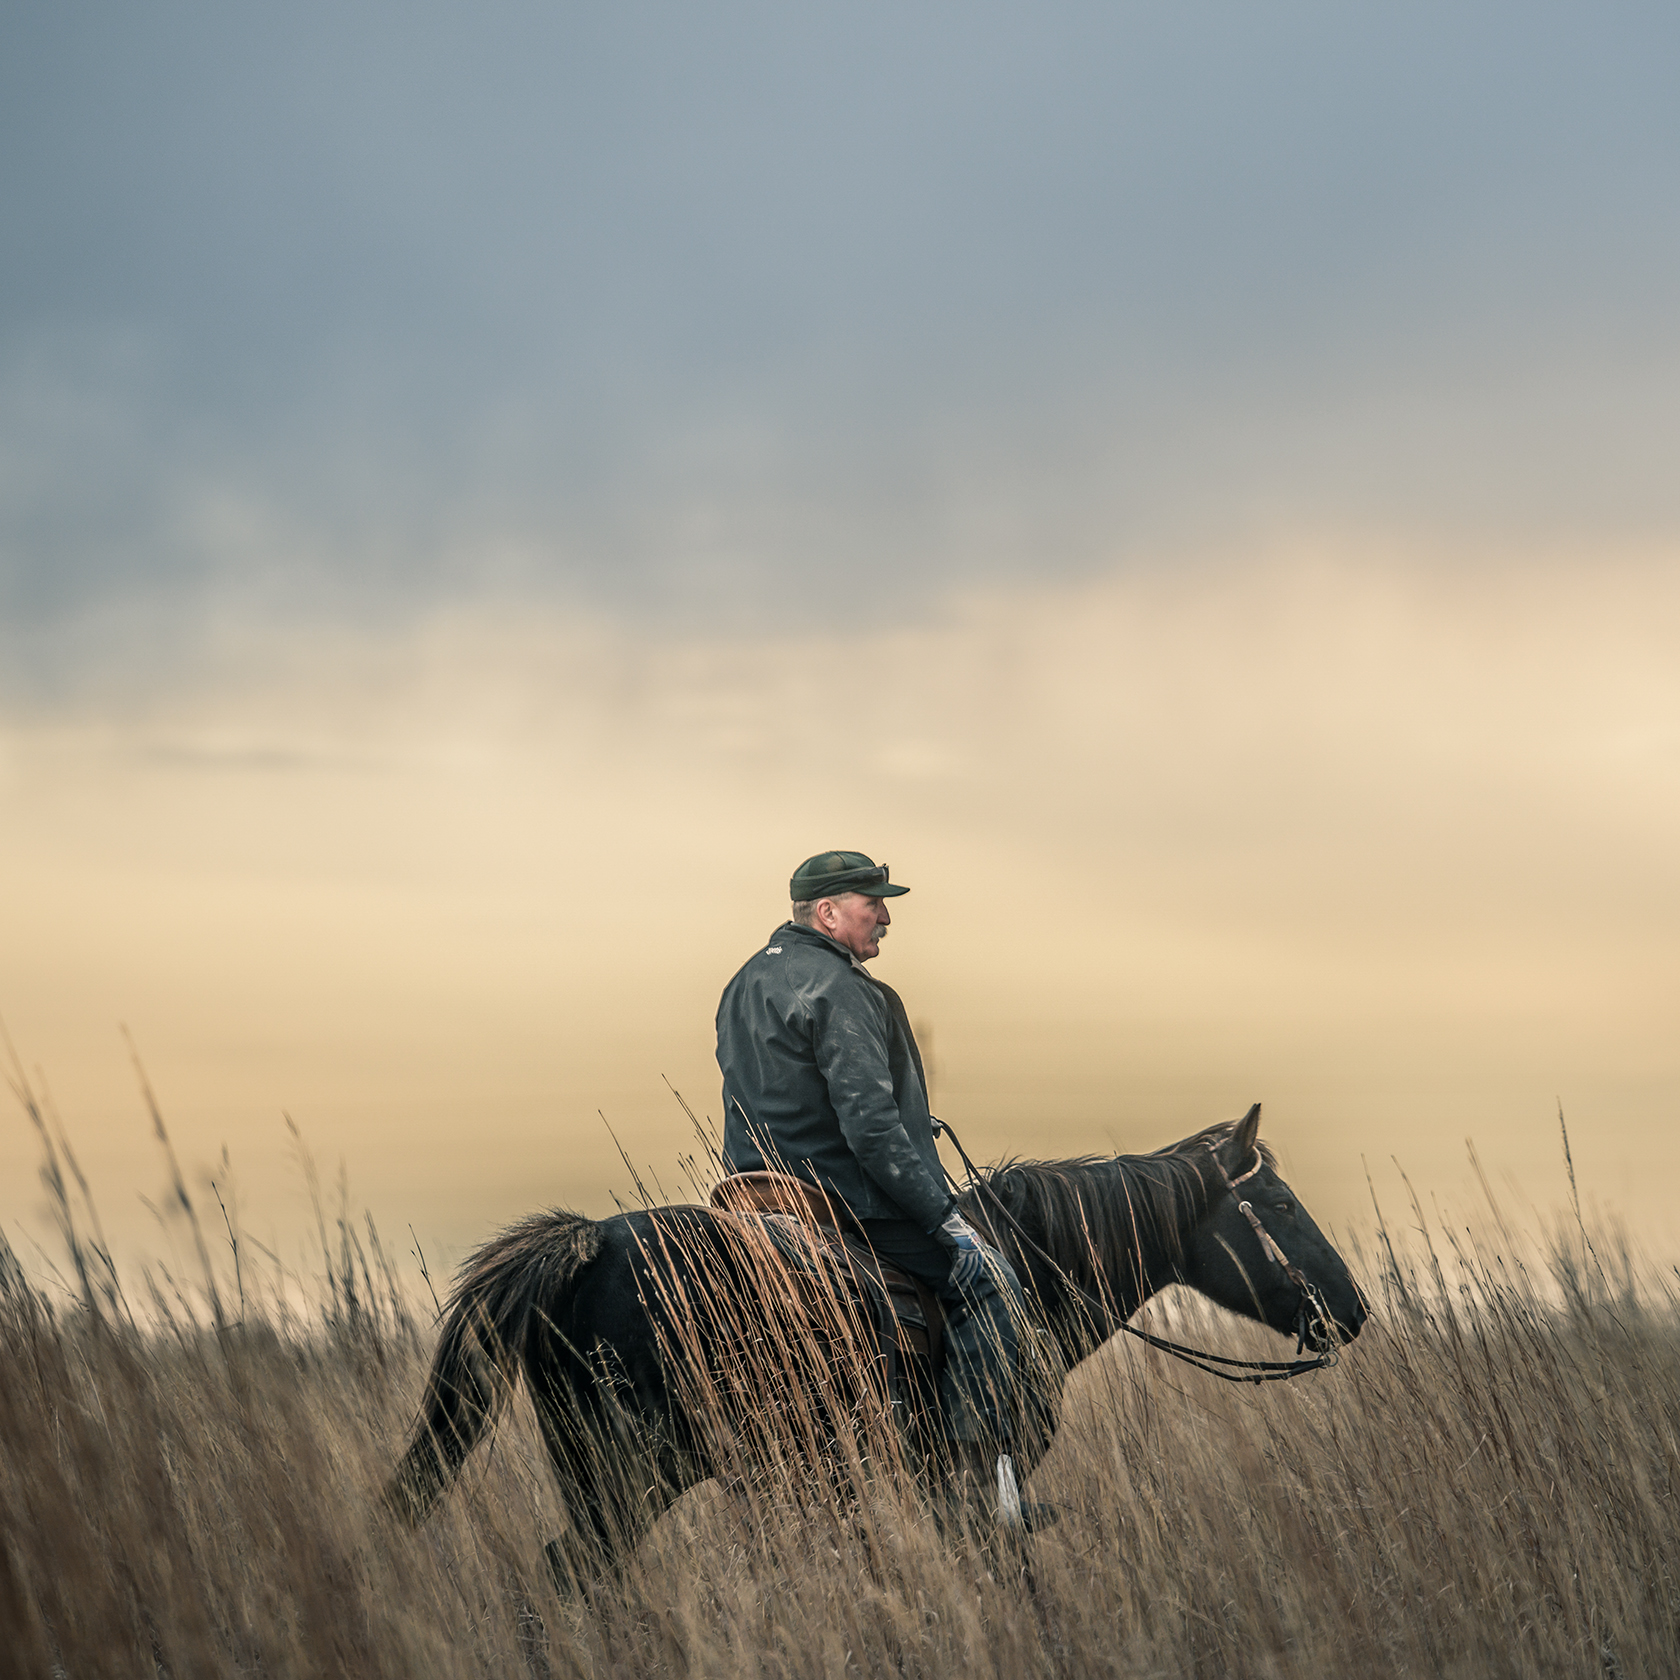 Producer on Horse in Field